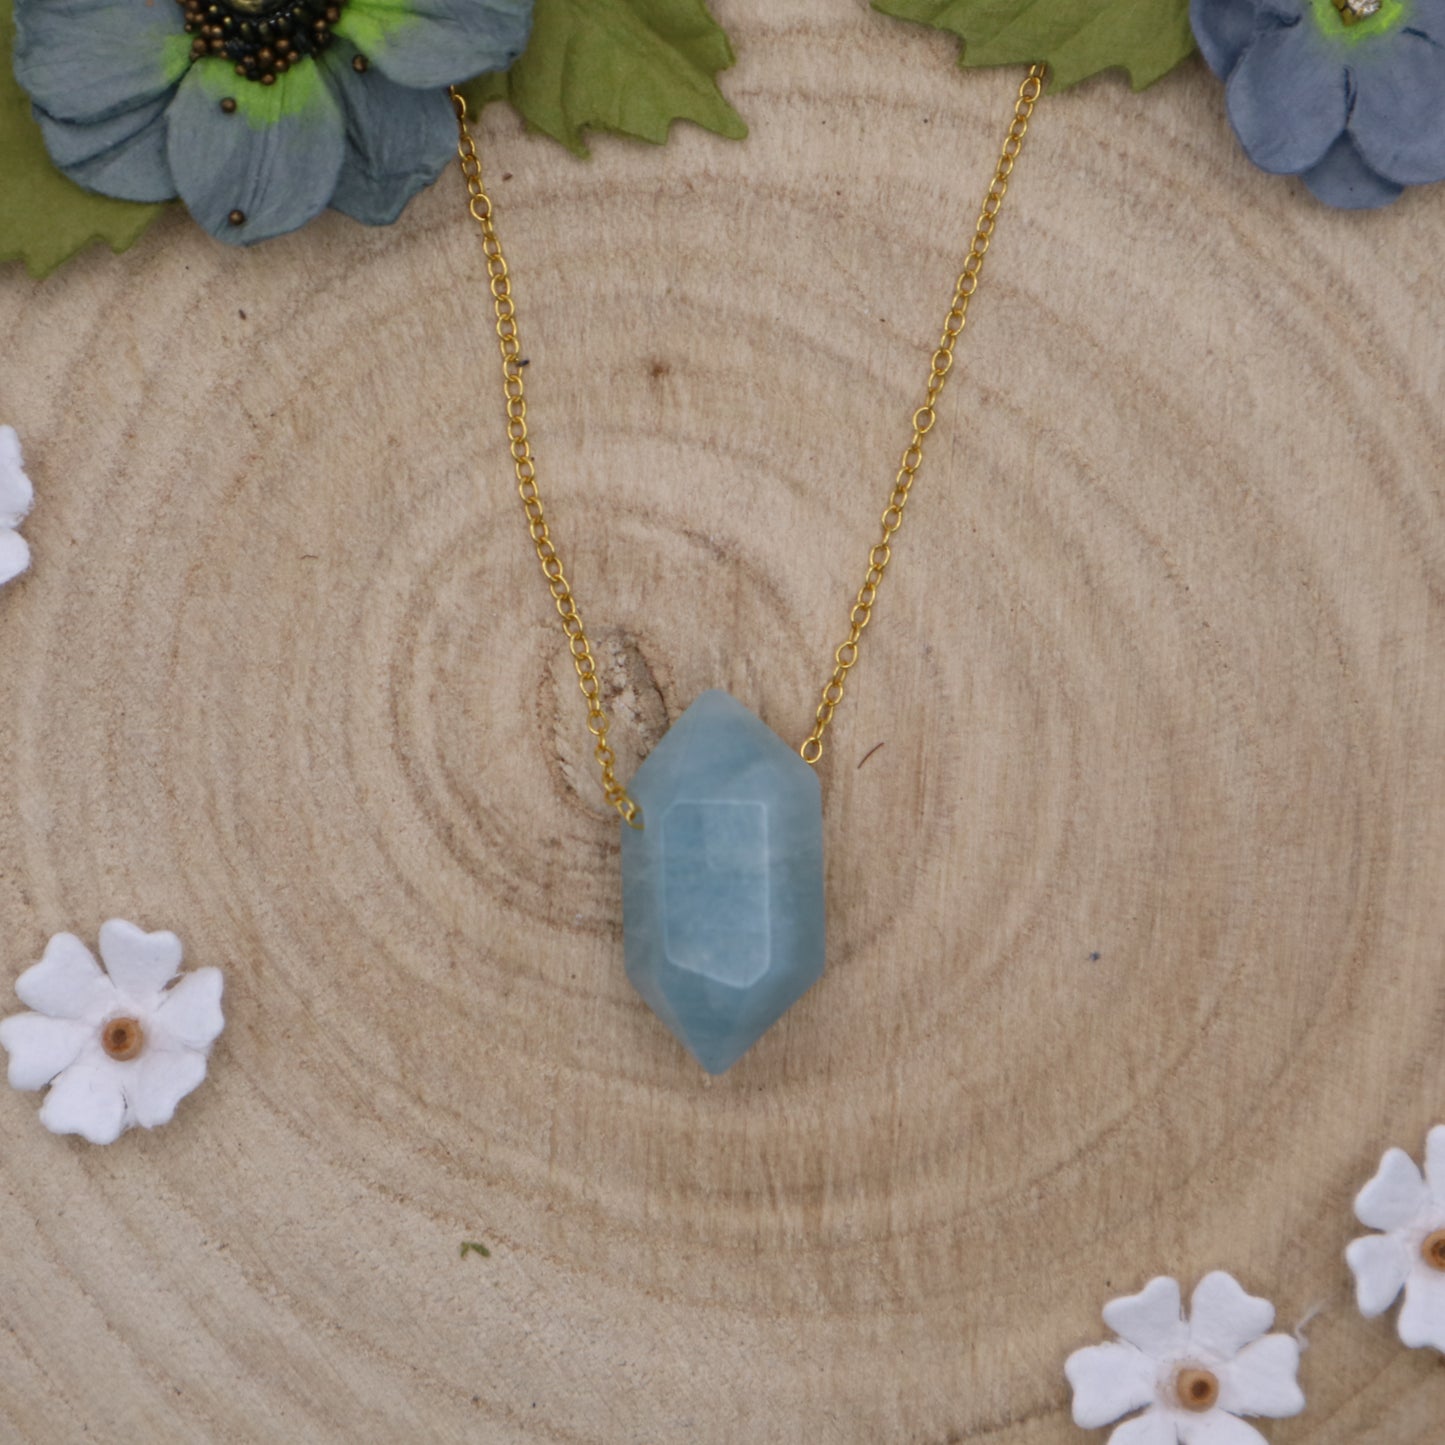 Small Aquamarine crystal on gold fine necklace chain